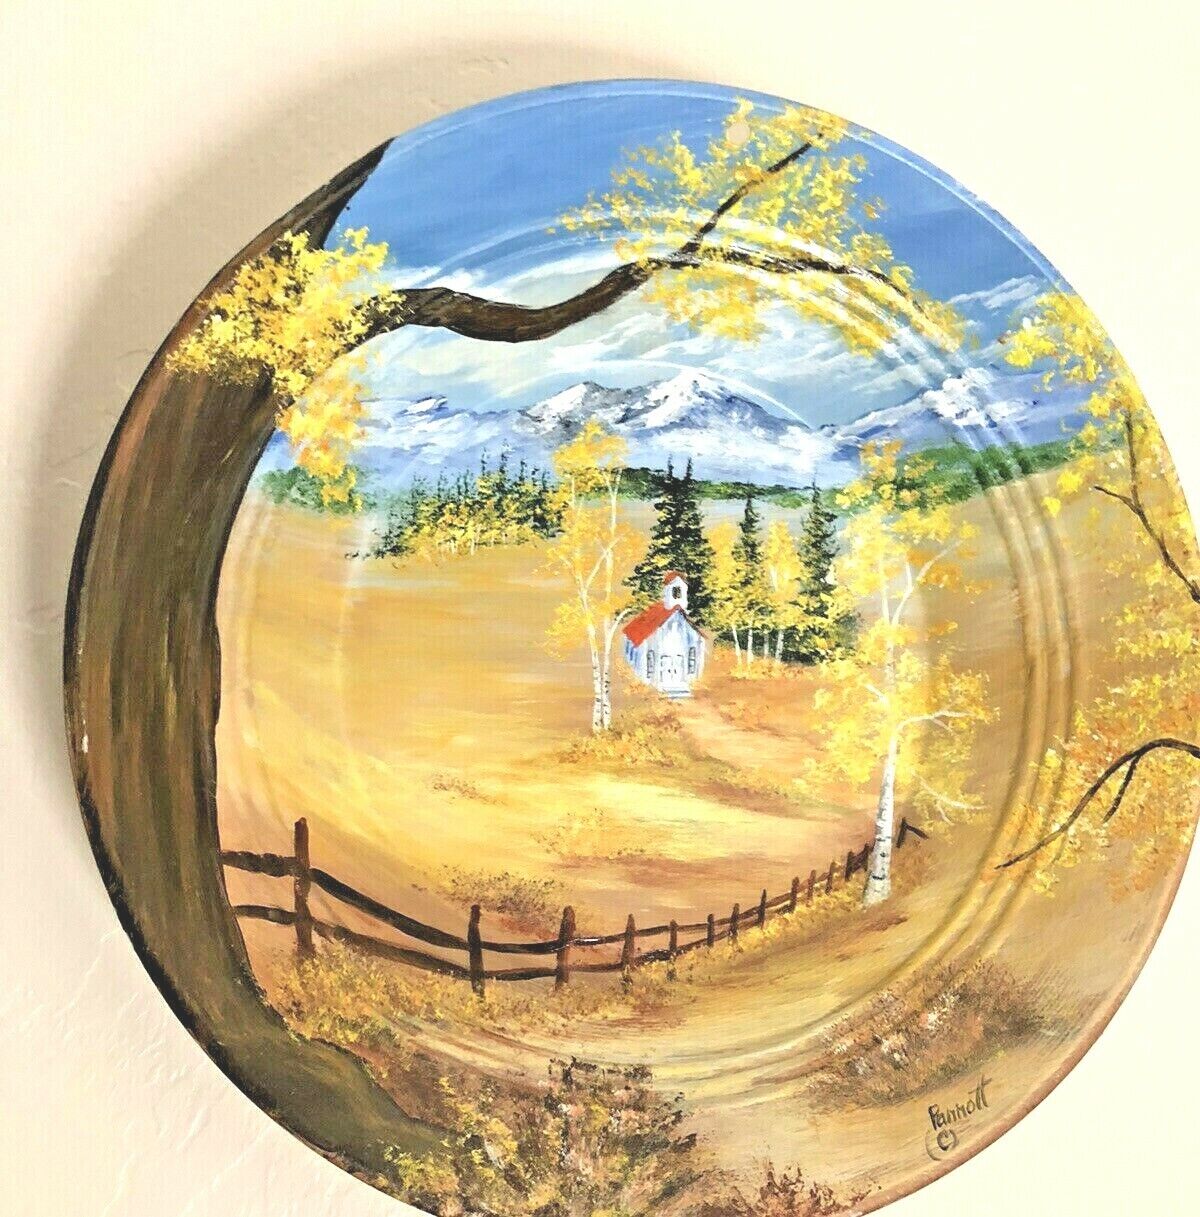 Vtg 12” Hand Painted Gold Pan Art Church Meadow Snow Cap Mountains Fall Signed